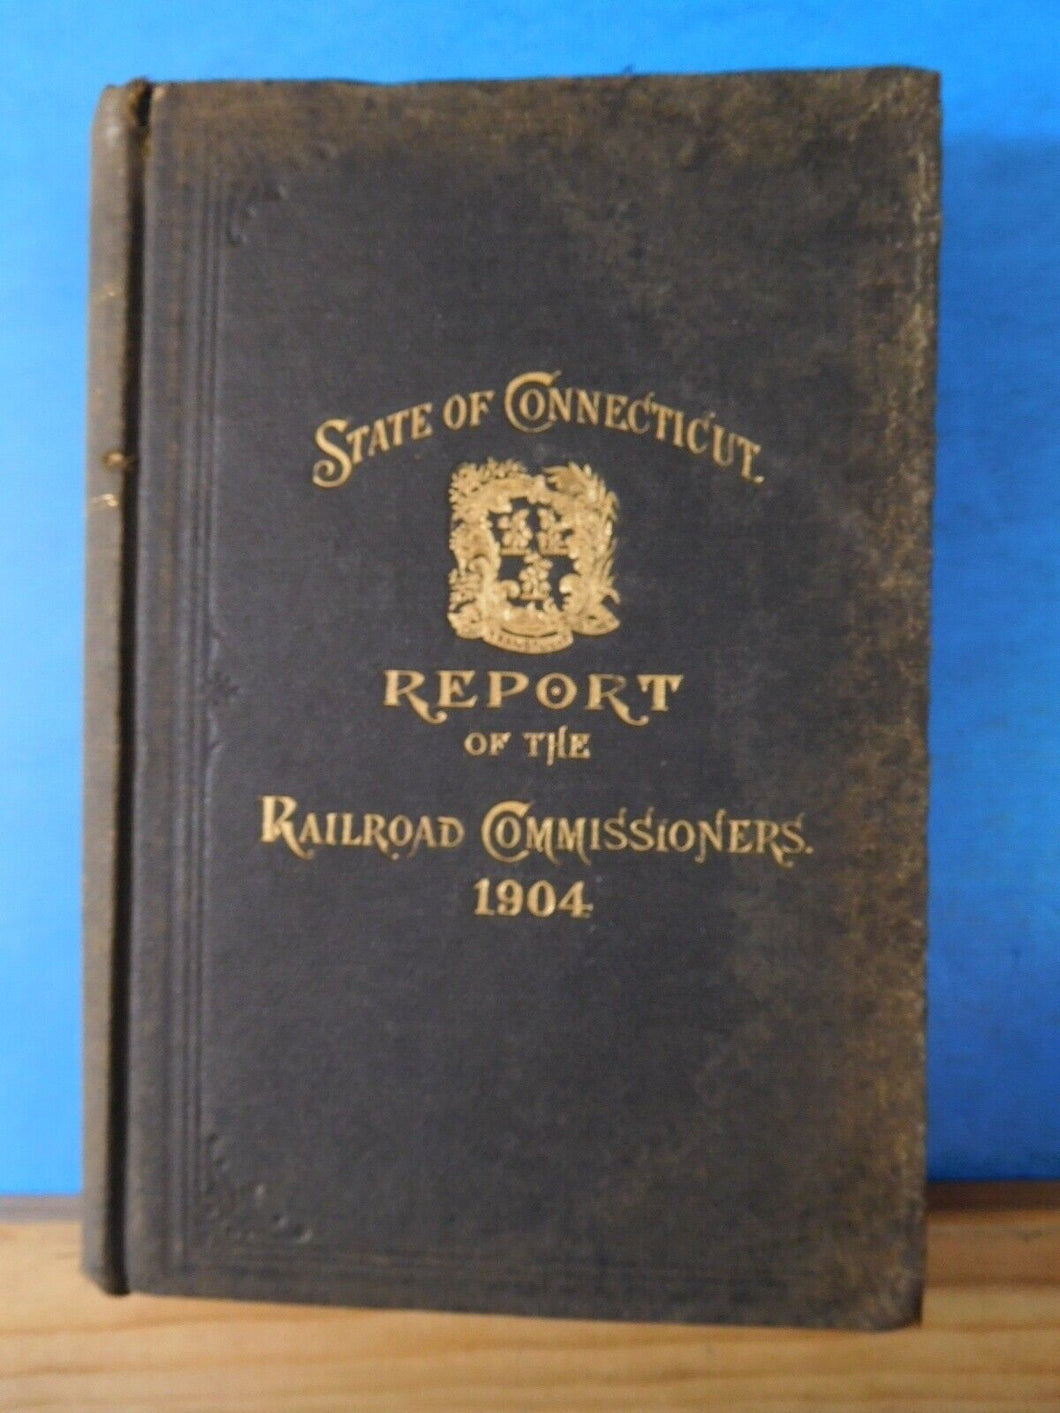 Railroad Commissioners State of Connecticut 1904